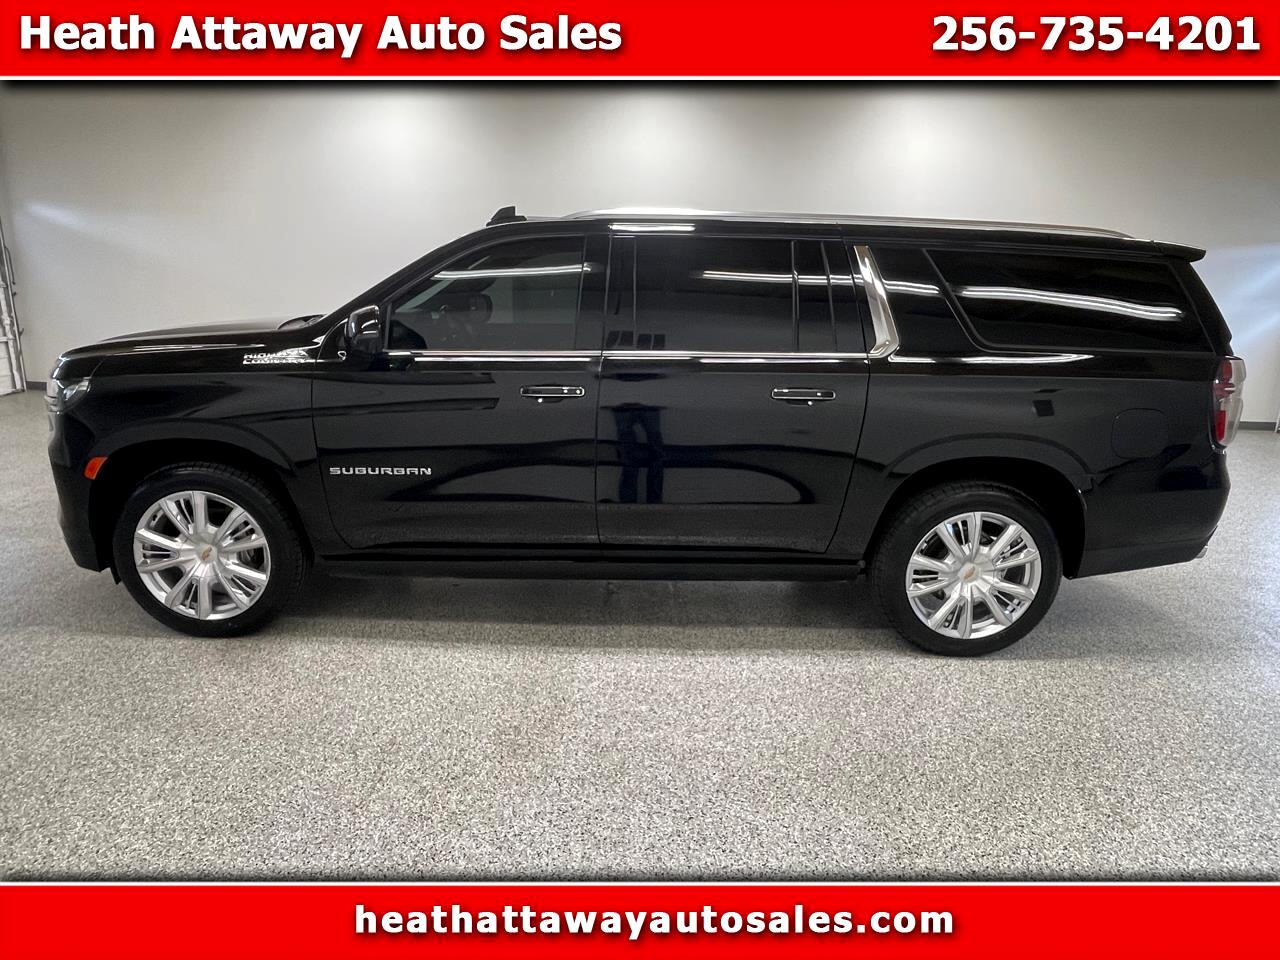 2021 Chevrolet Suburban High Country 4DR 4WD